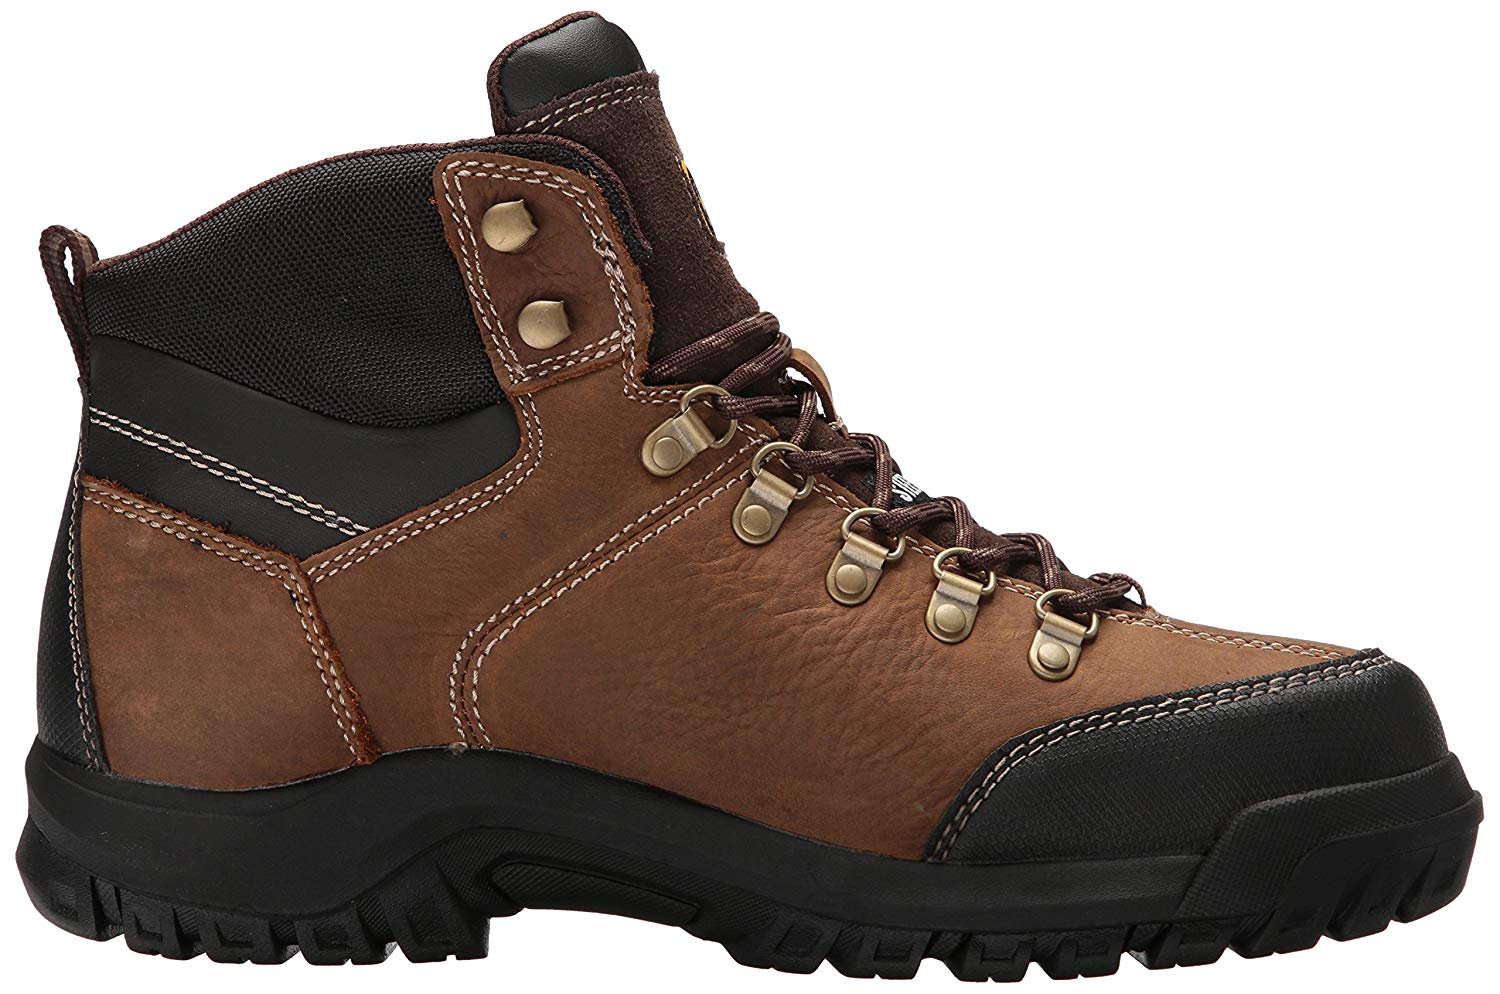 Caterpillar Mens P90935 Leather Steel toe Lace Up Safety Shoes, Brown ...